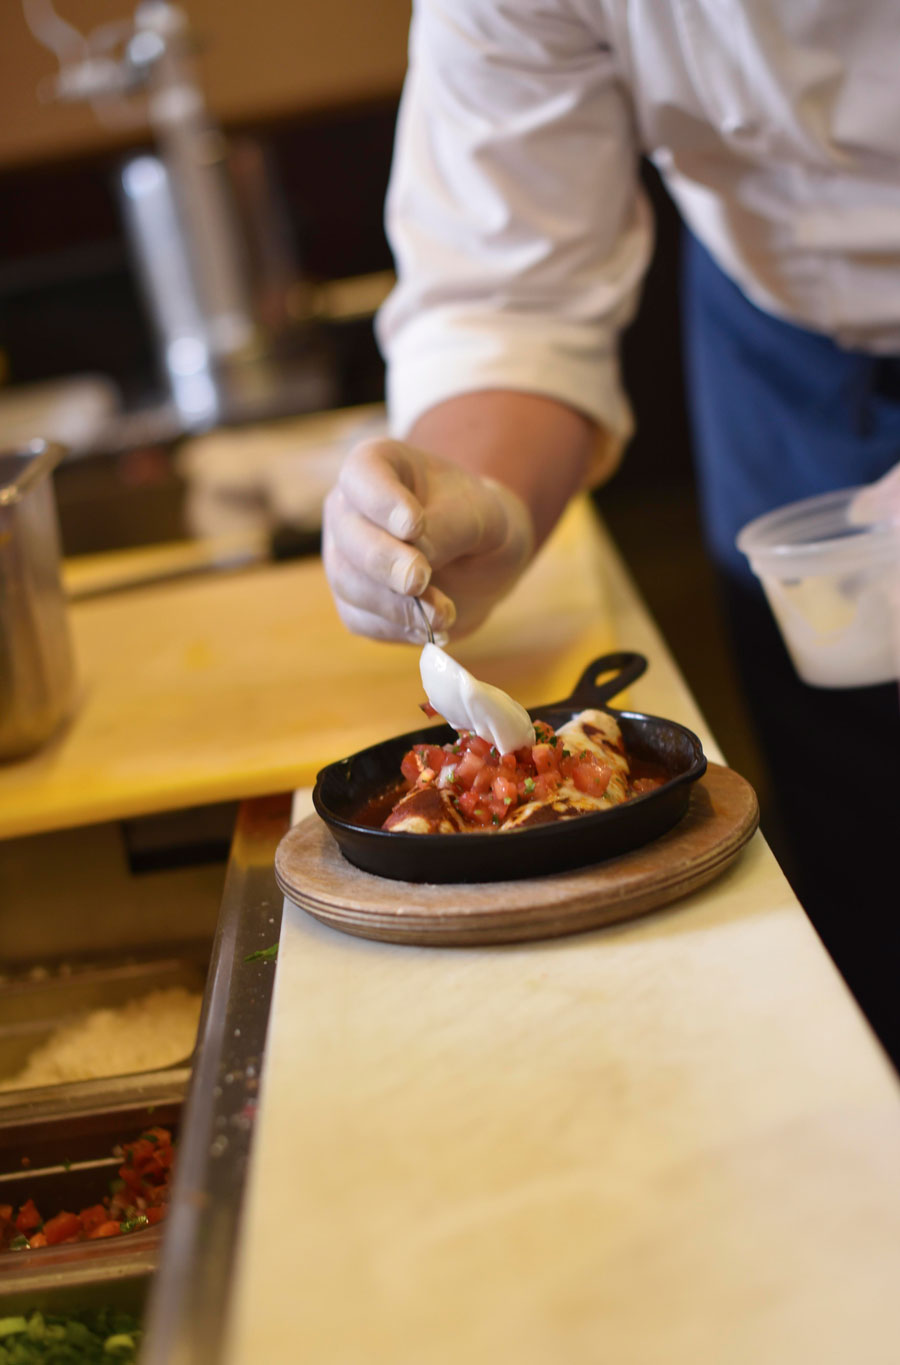 Chef August Schuchman adds a dolop of cream onto the enchilada dish 